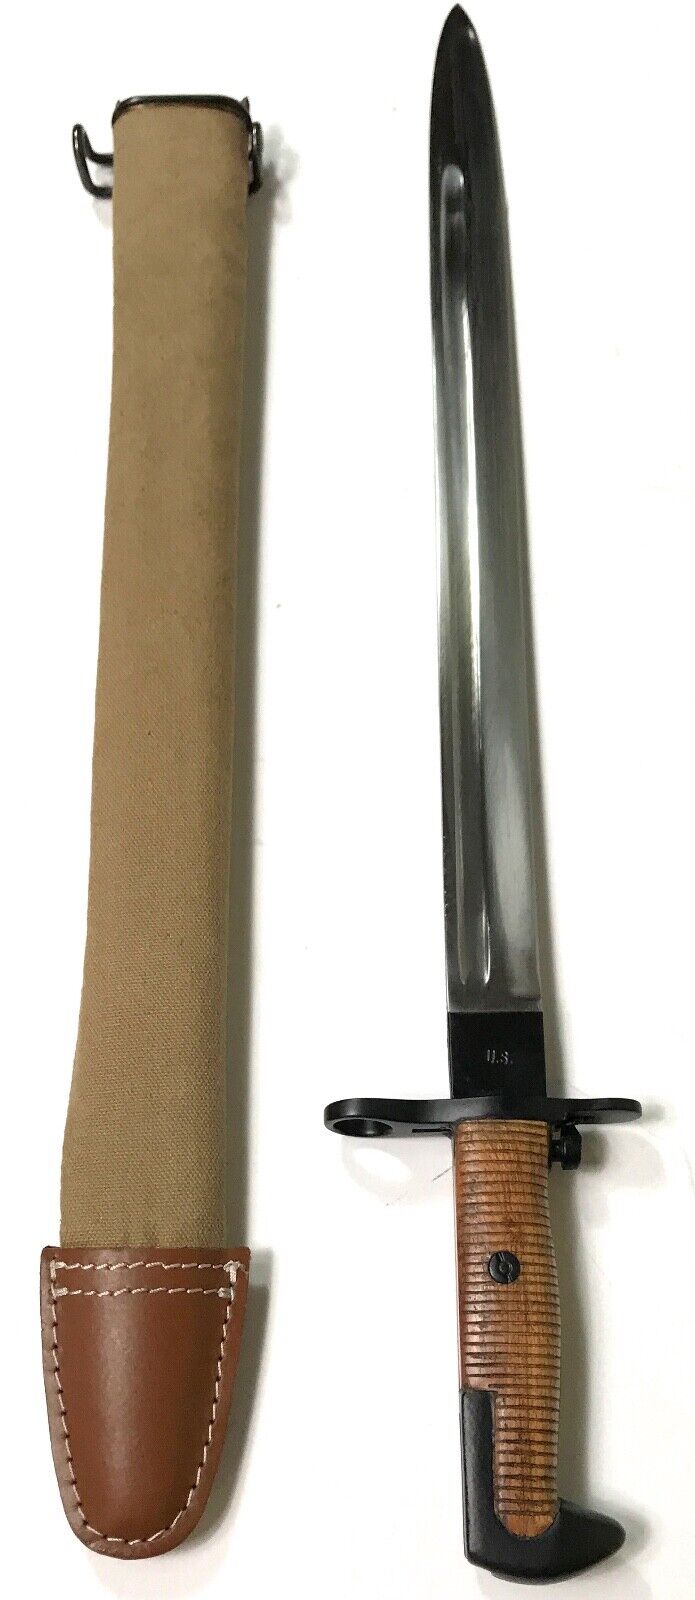 WWI US ARMY M1905 M1903 SPRINGFIELD WINCHESTER RIFLE BAYONET & CARRY SCABBARD